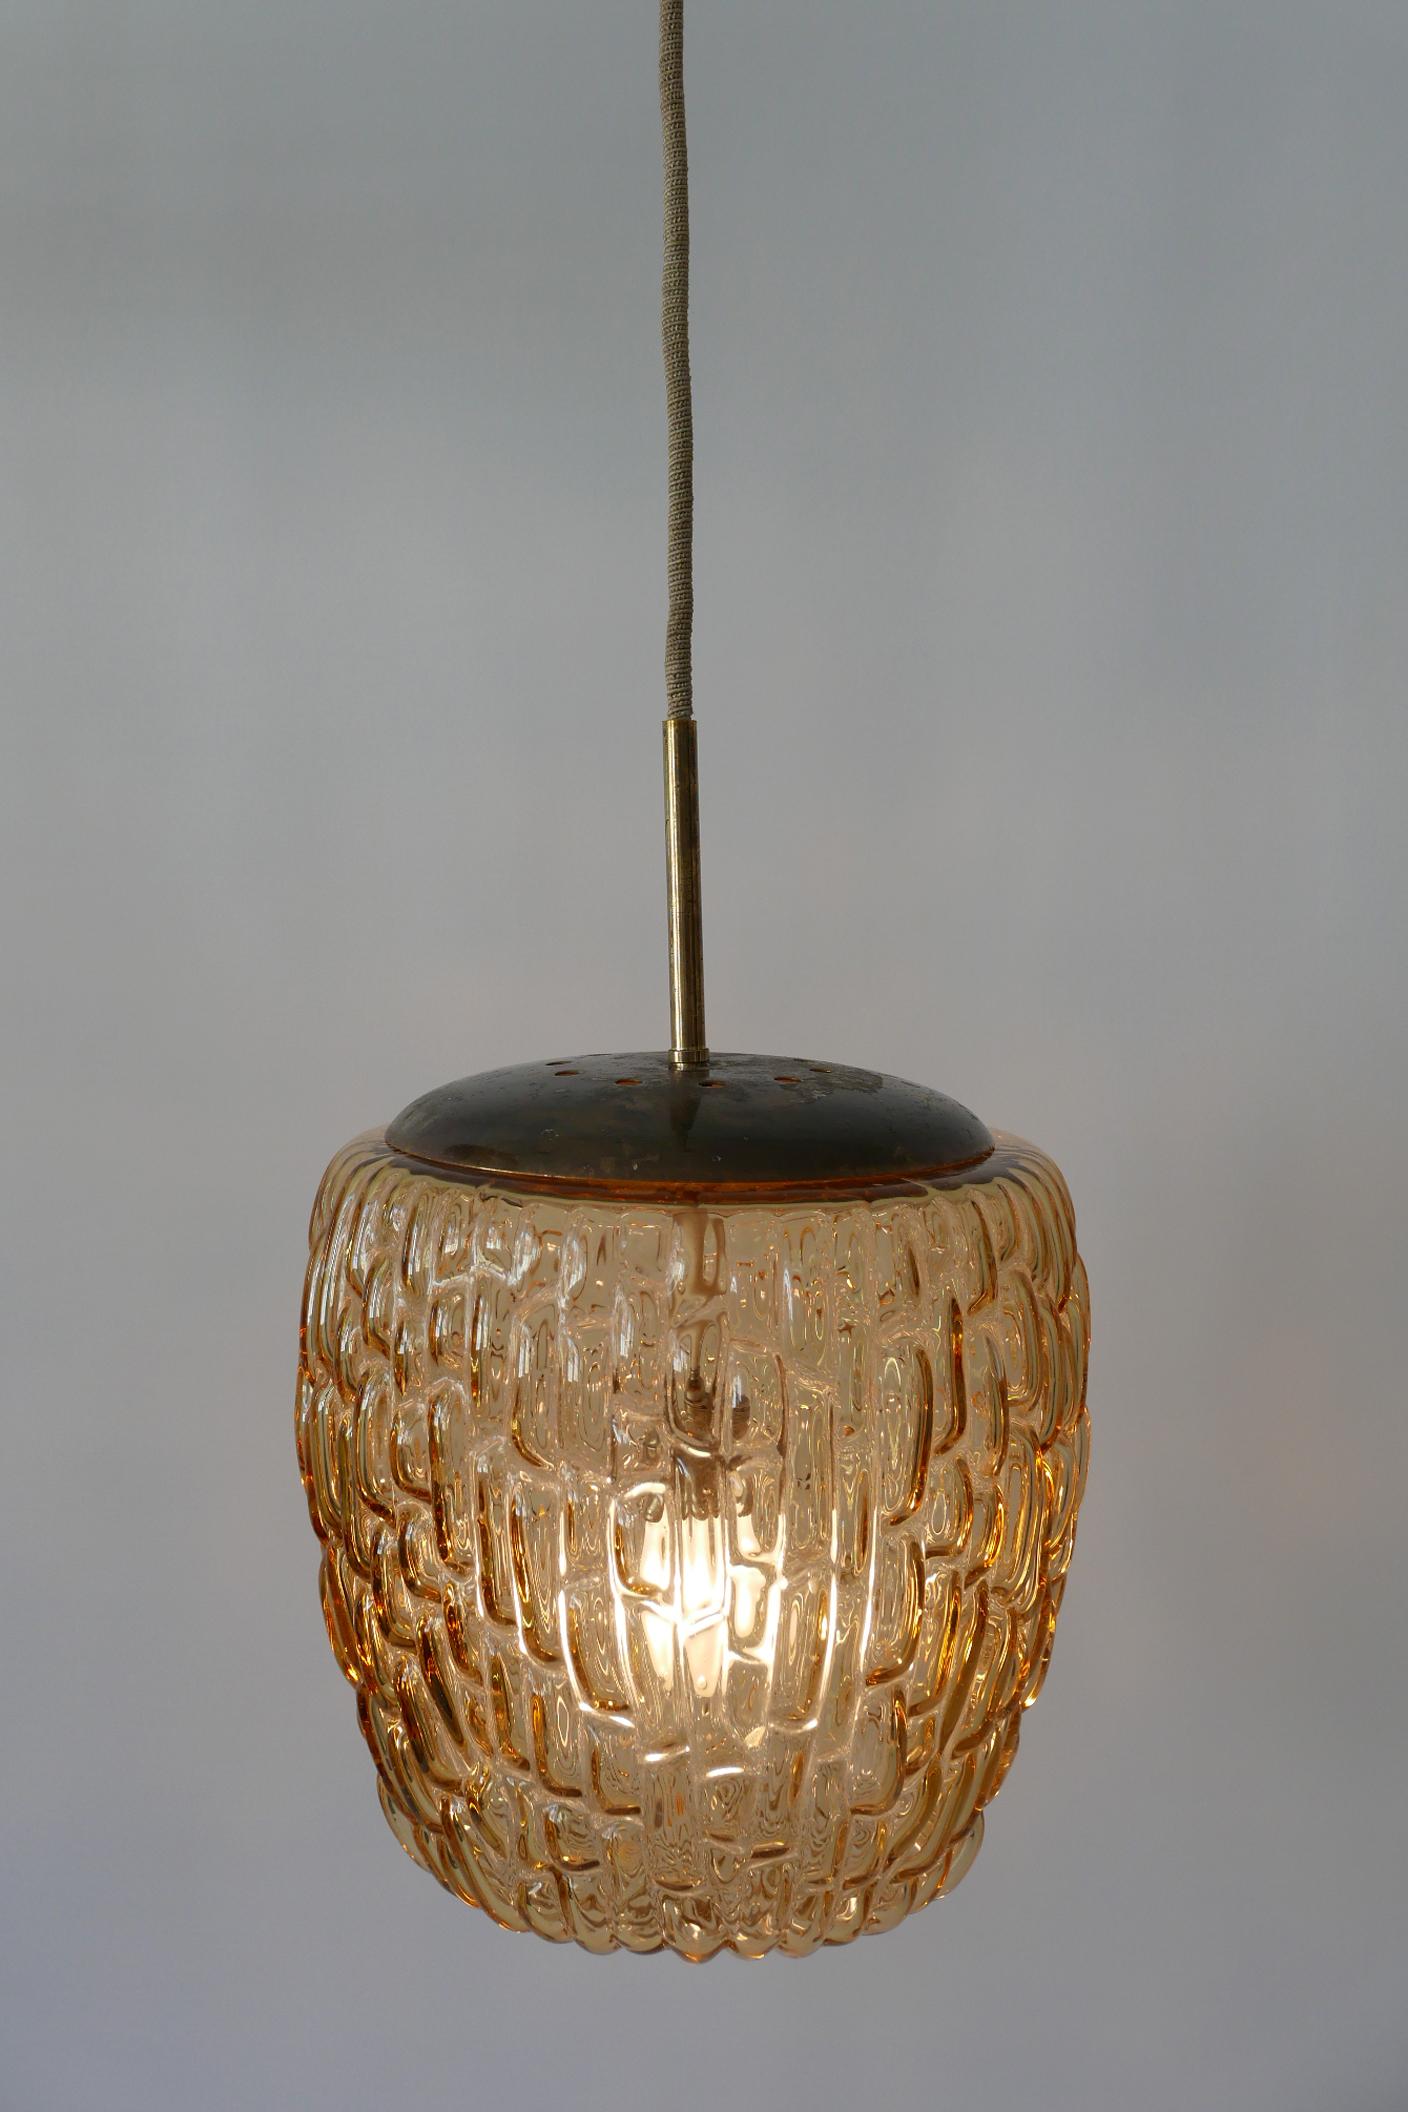 Exceptional and decorative Mid-Century Modern pendant lamp or hanging light. Designed and manufactured by Rupert Nikoll, 1950s, Austria.

Executed in thick honey colored blown glass and brass, it comes with 1 x E27 Edison screw fit bulb holder, is